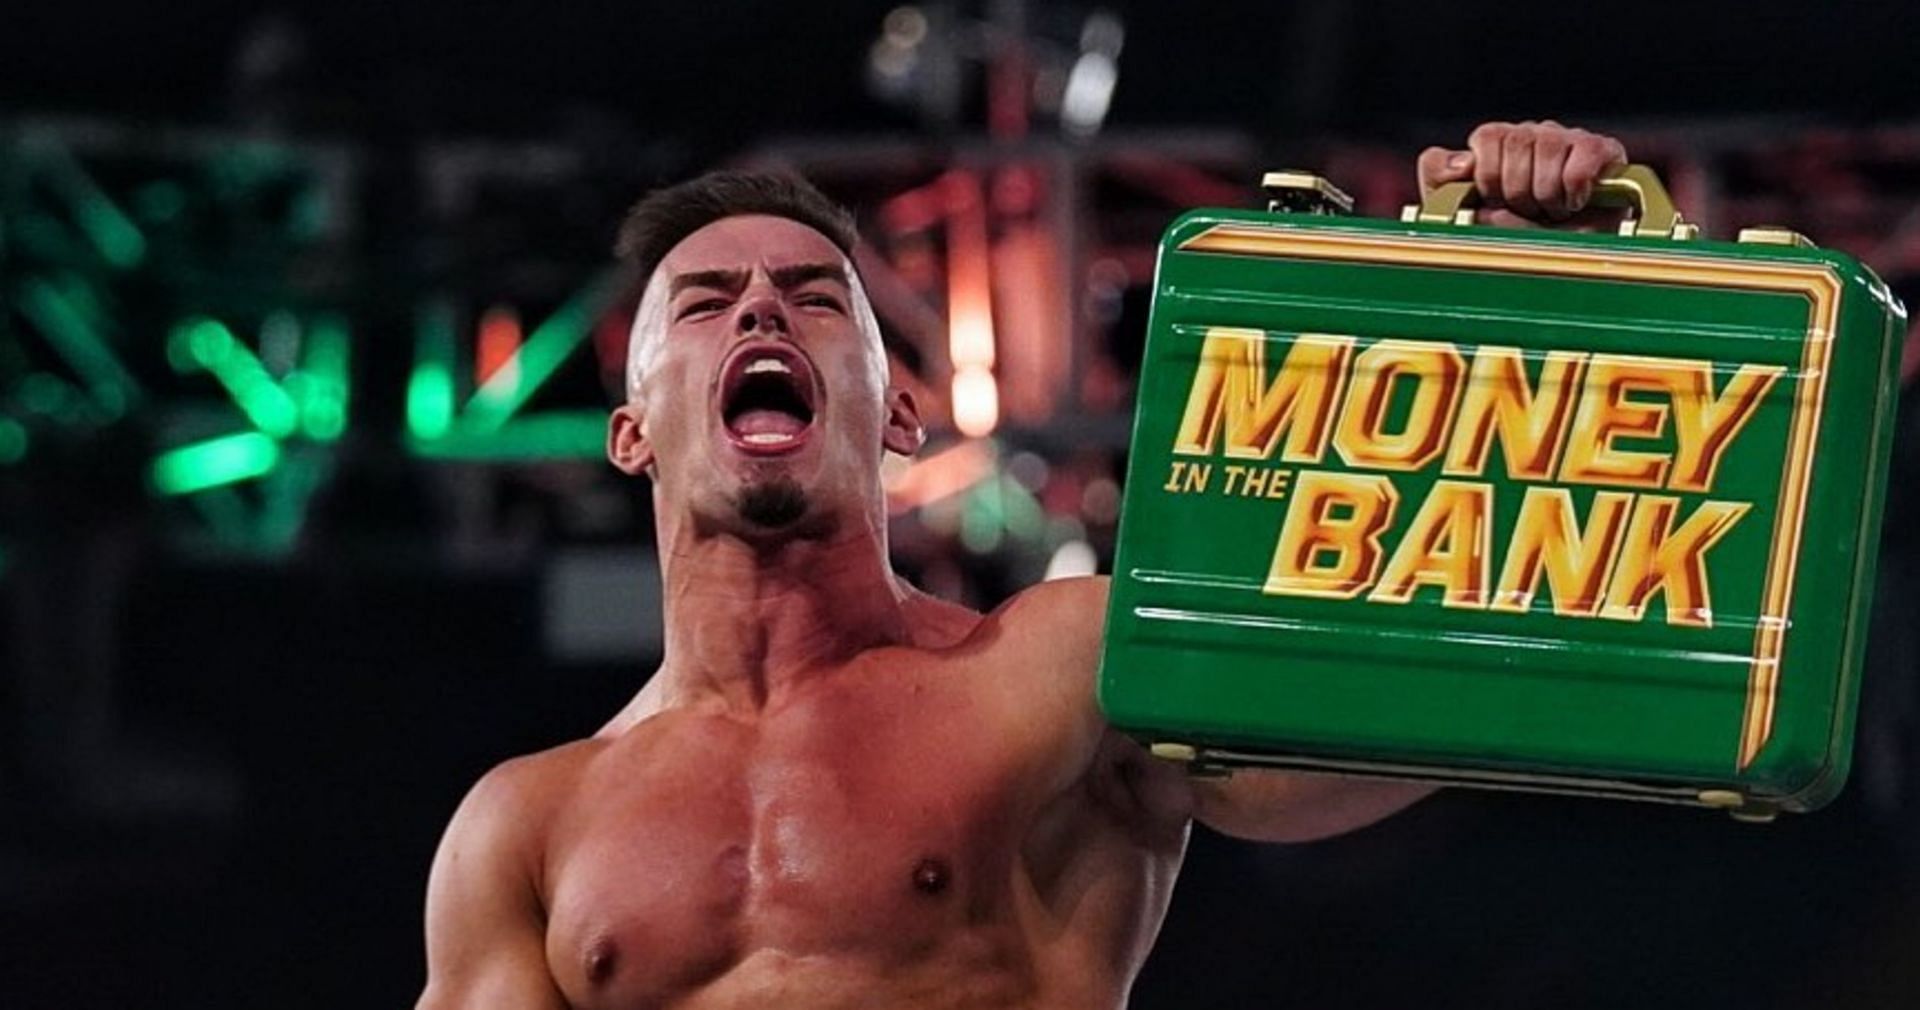 Austin Theory is the current Money in the Bank briefcase holder